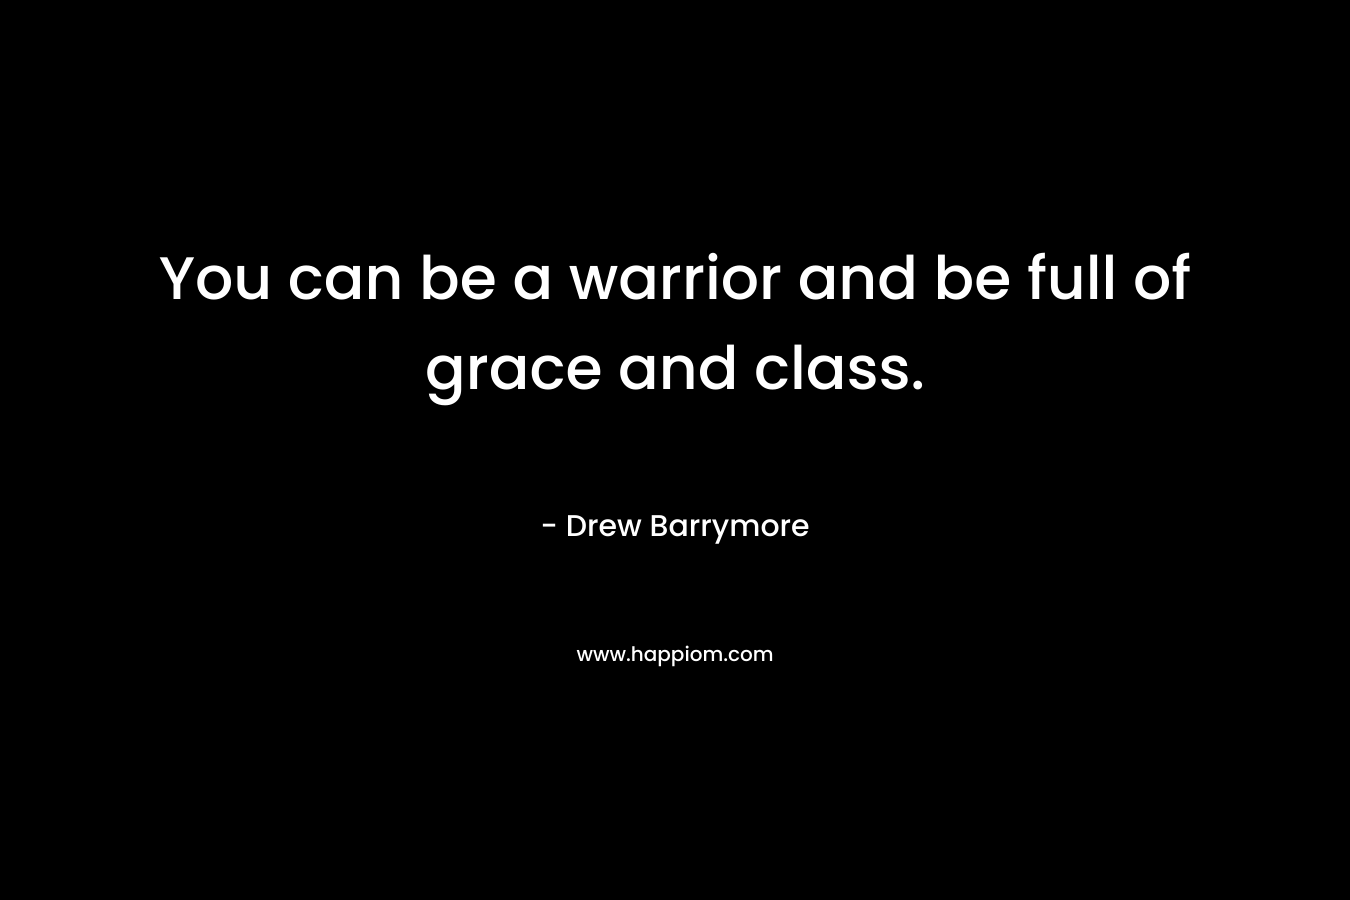 You can be a warrior and be full of grace and class.